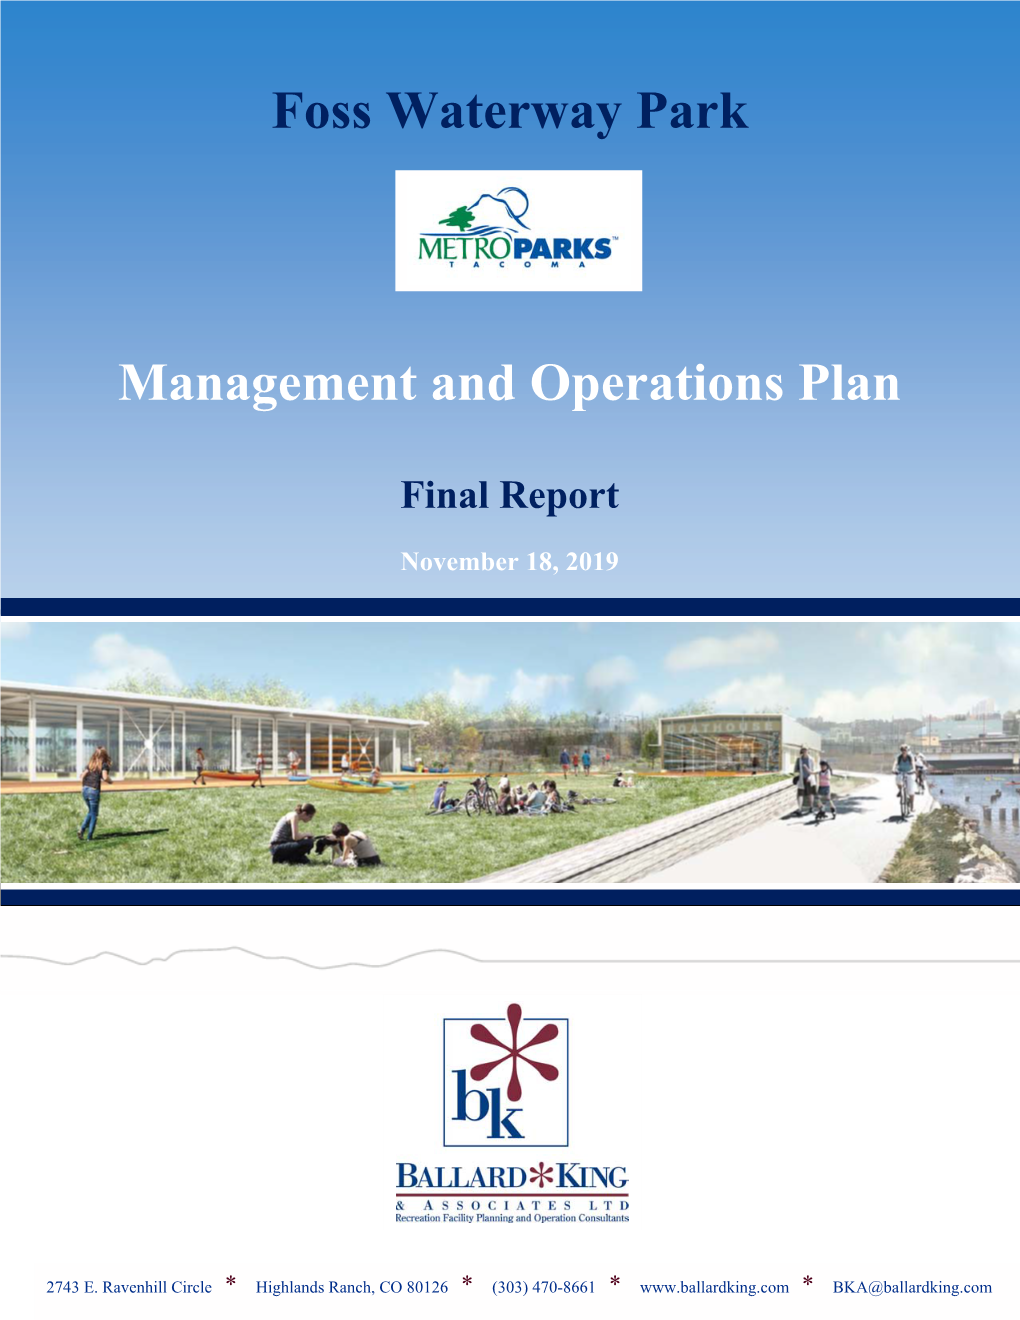 Foss Waterway Park Management and Operations Plan